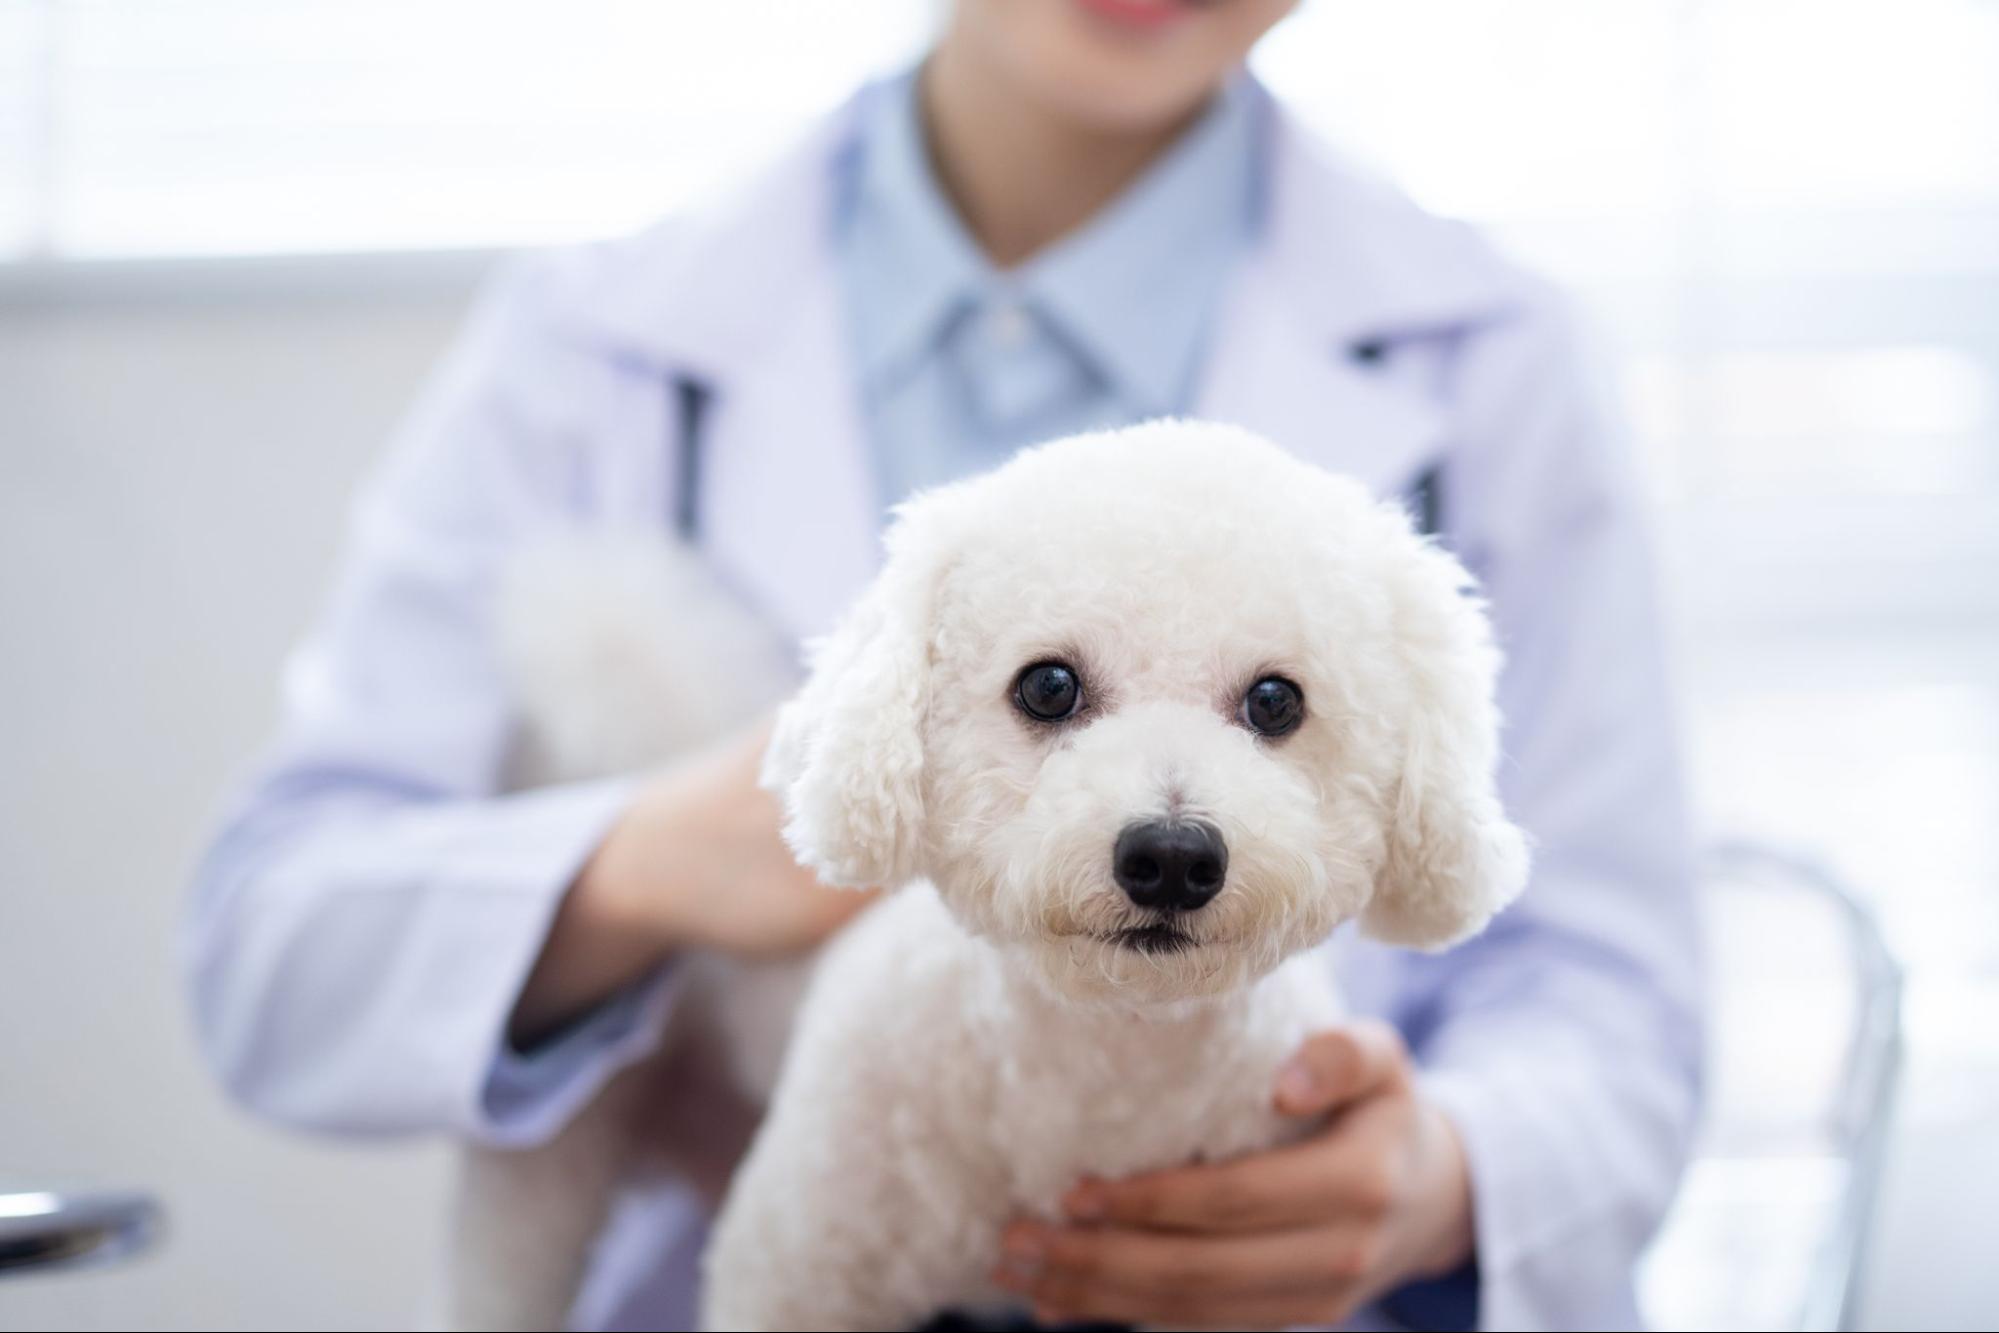 a small white and curly dog is held by a doctor and smiles at the camera